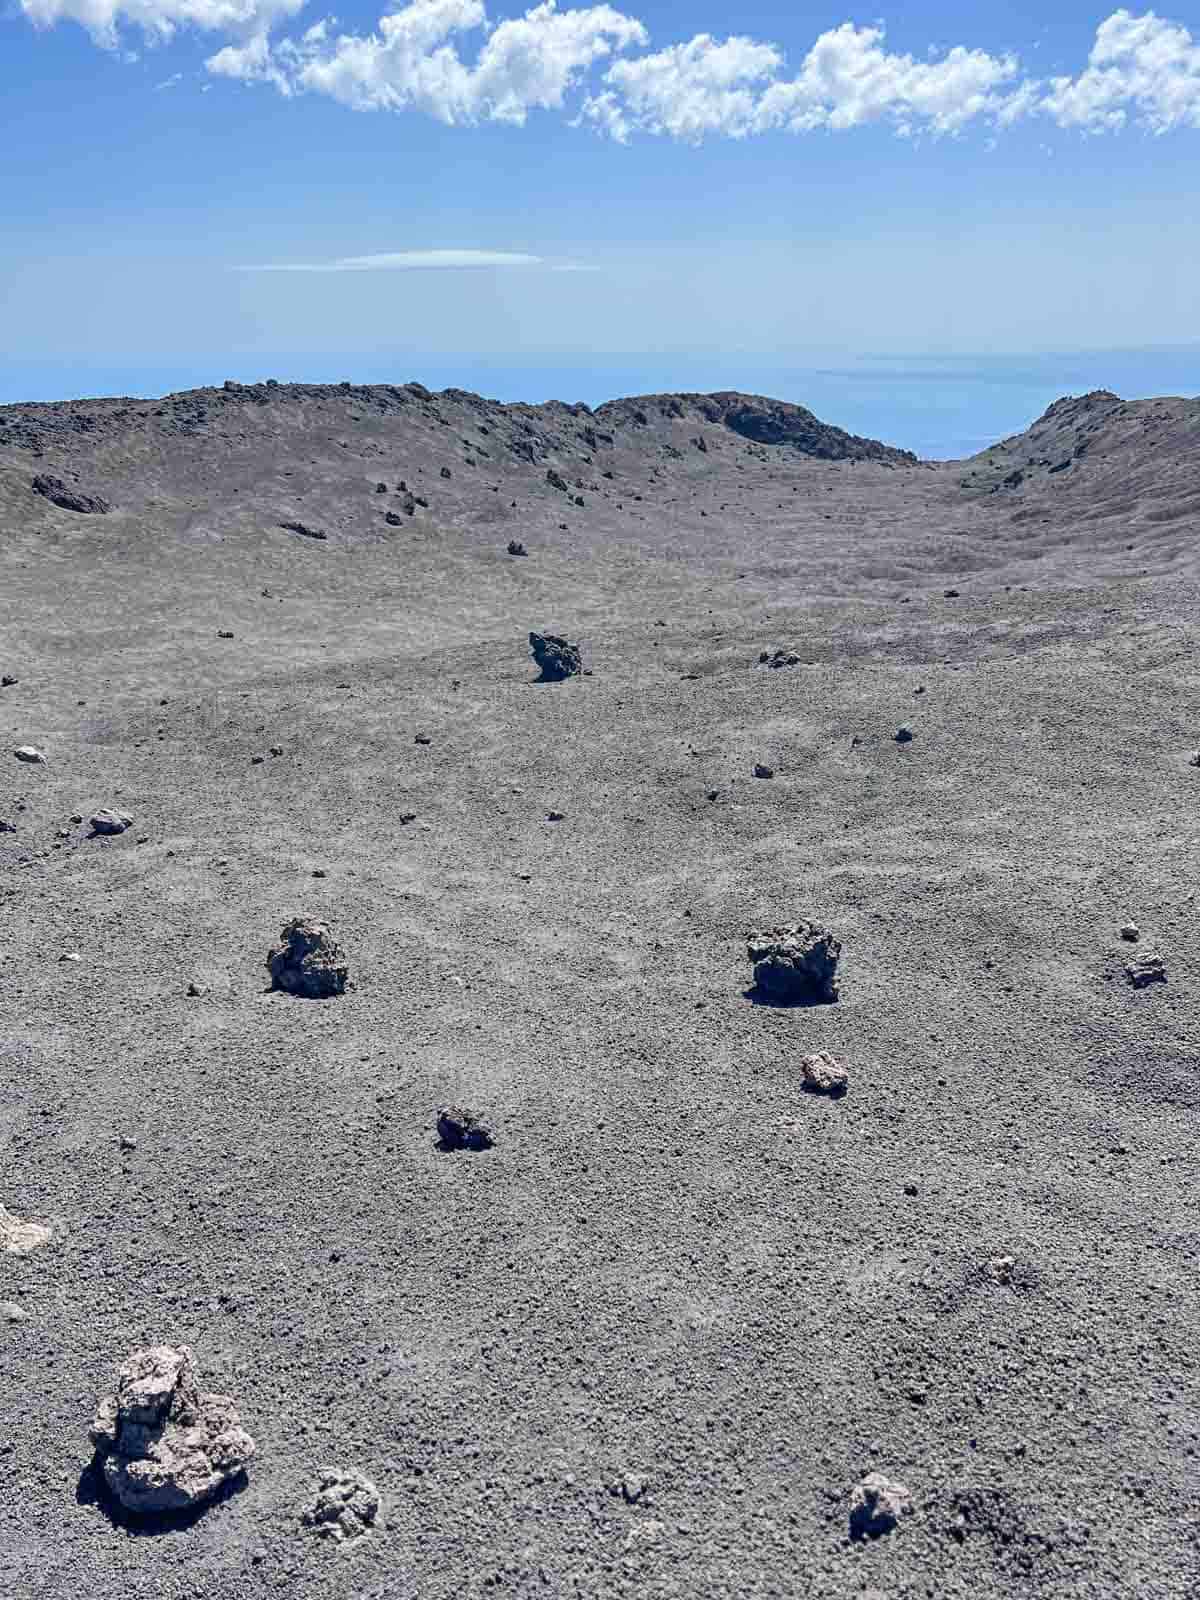 A view of the rocky terrain at the top of Mt. Etna Volcano